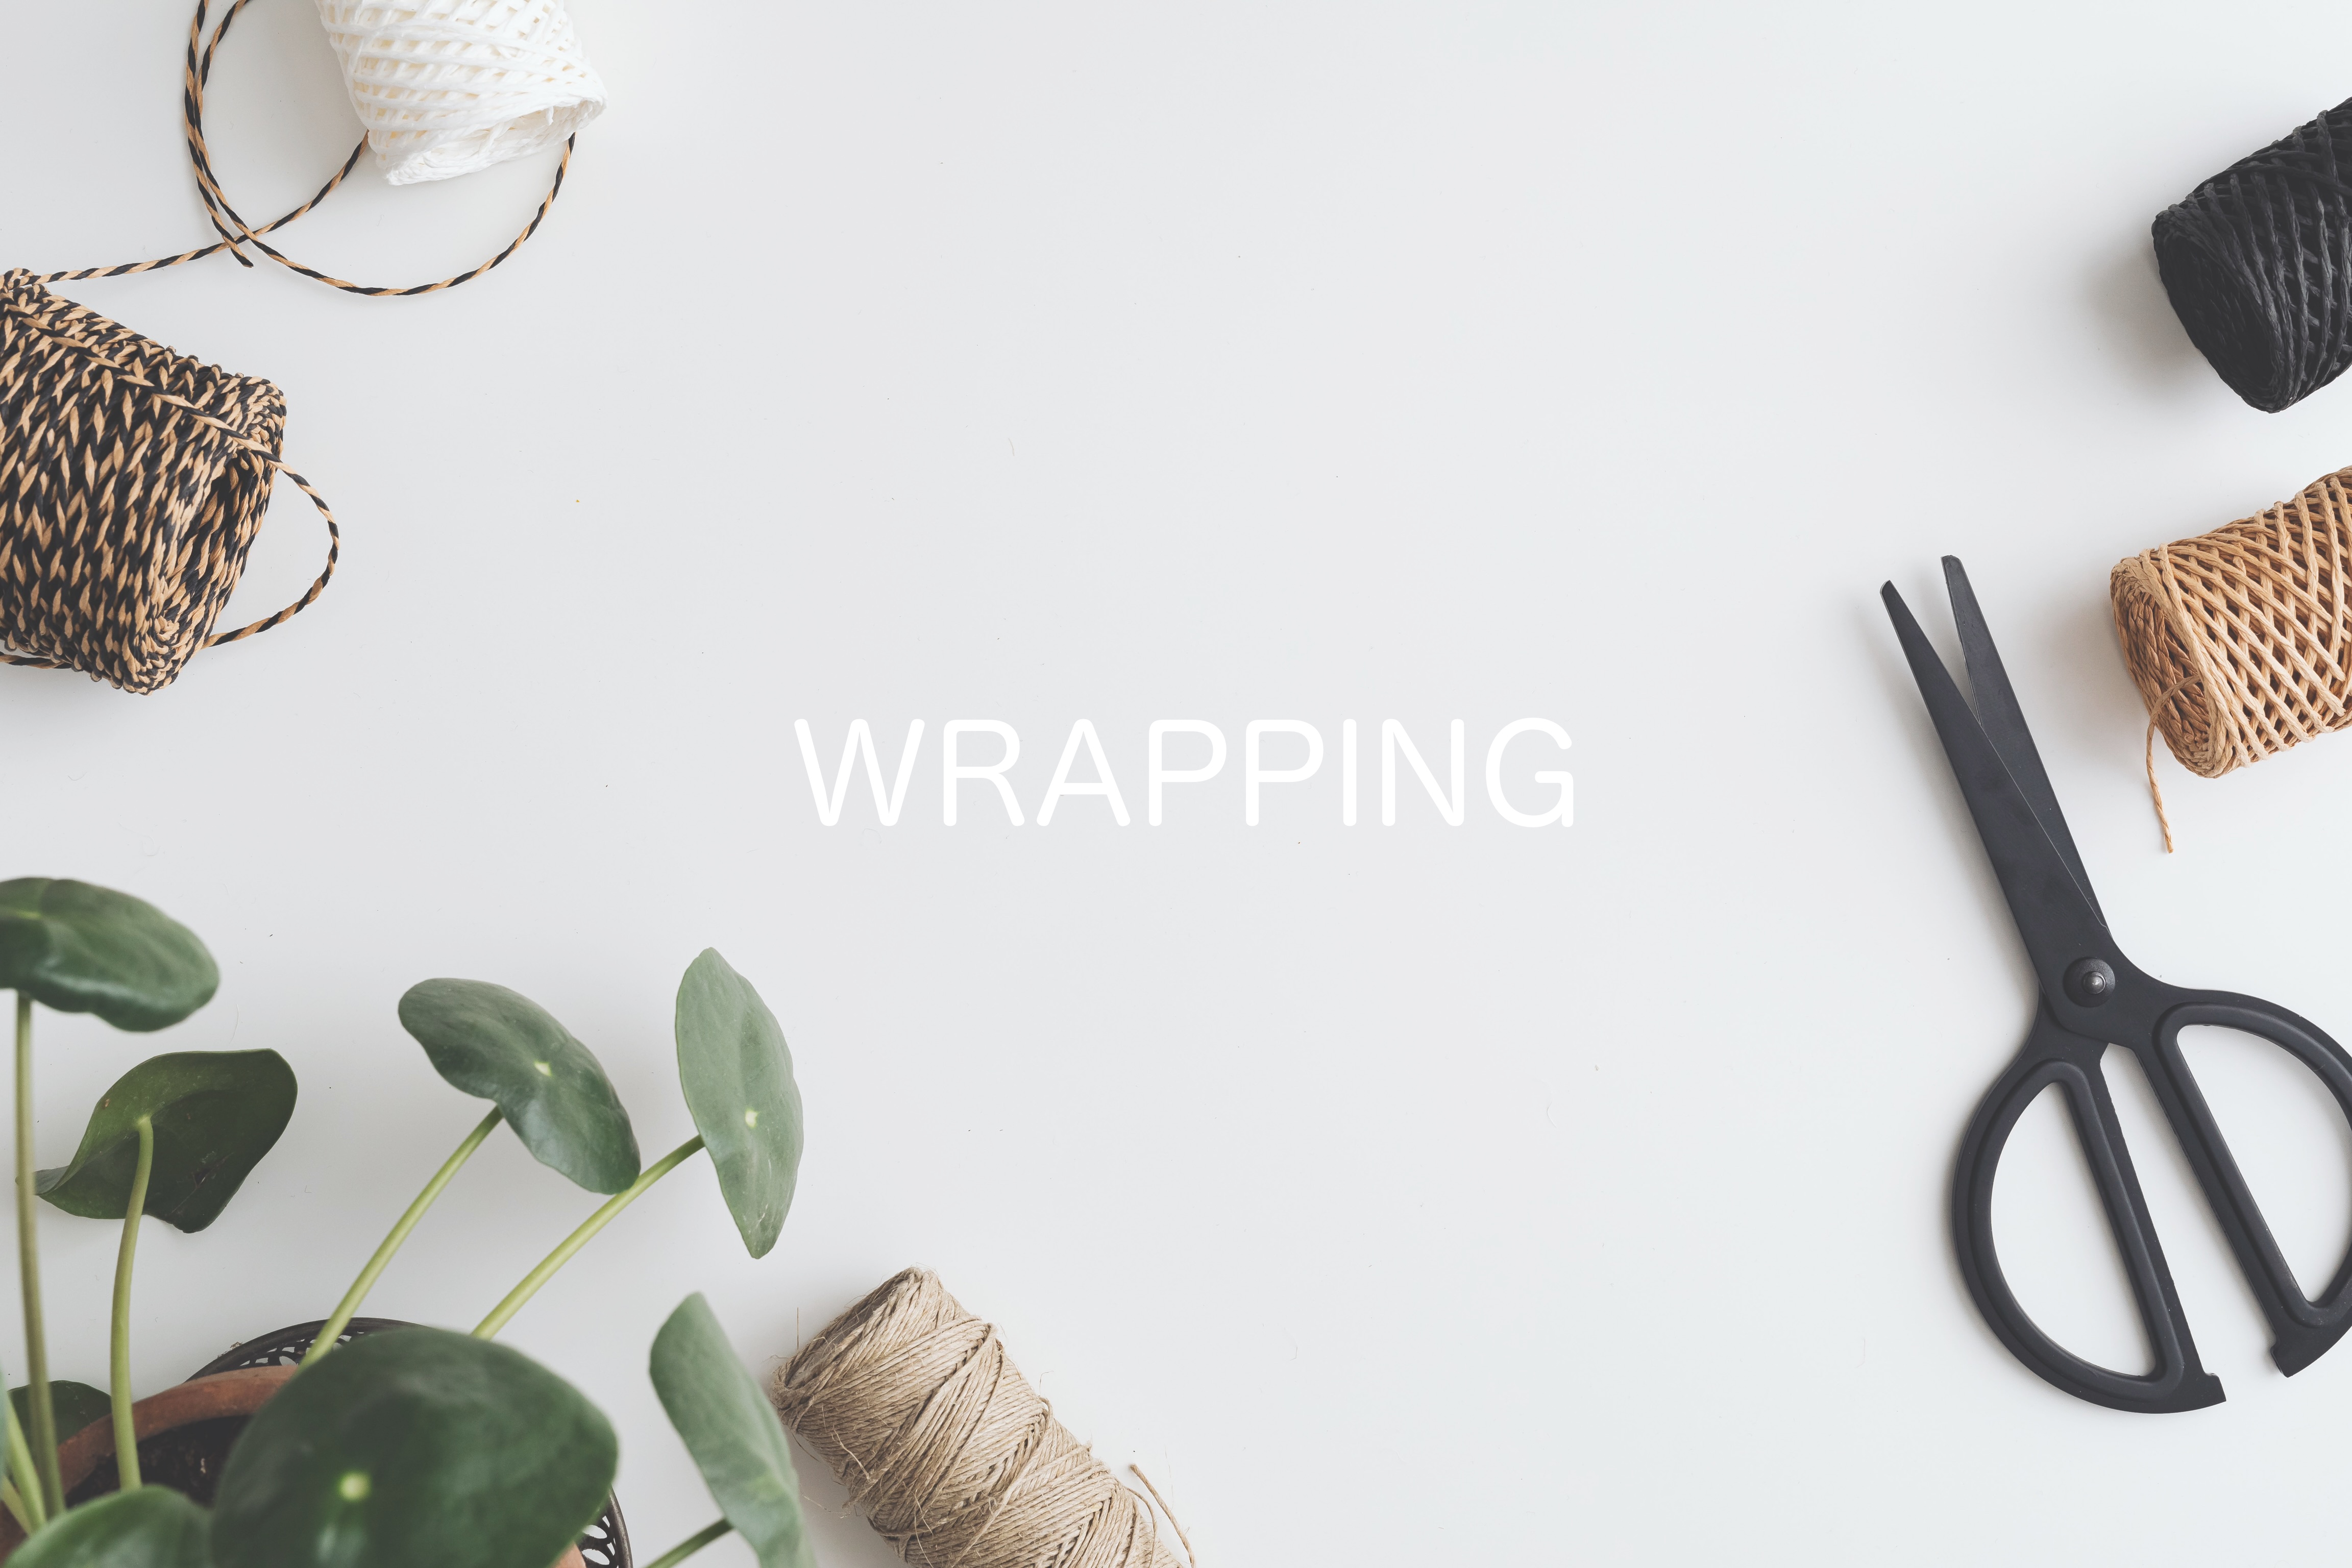 ￤ WRAPPING ￤